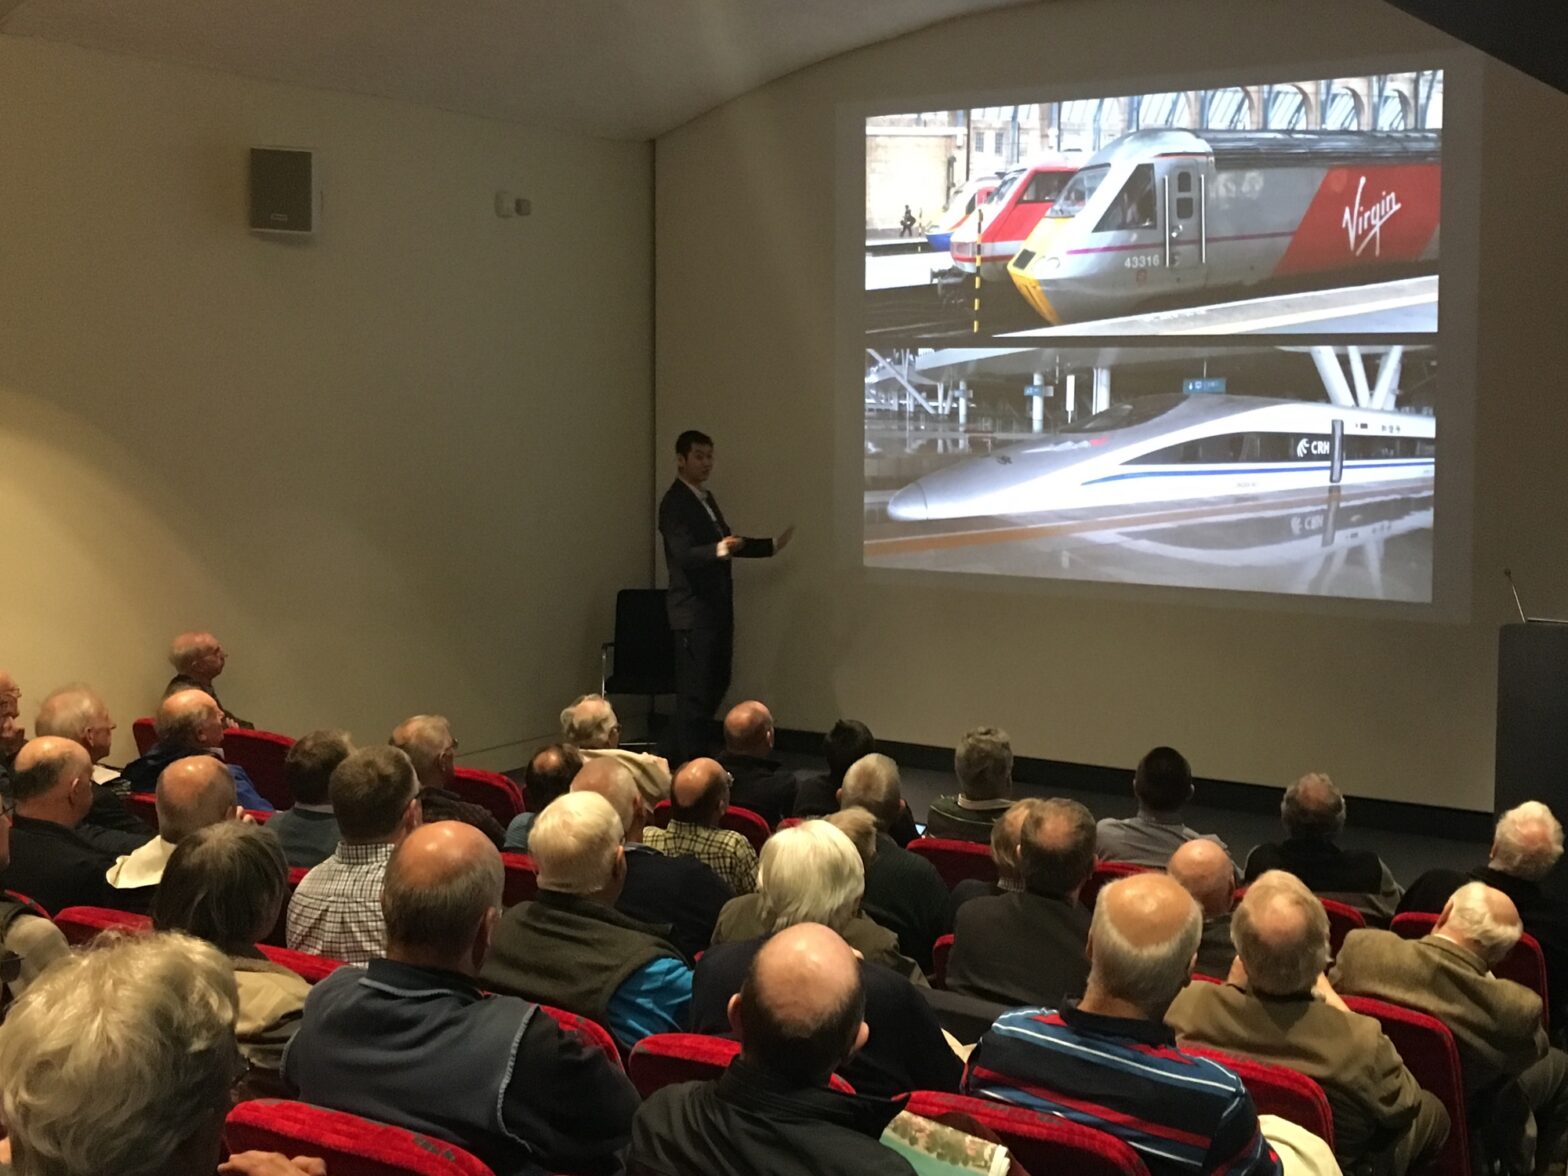 An image of David Feng presenting a railway talk in London